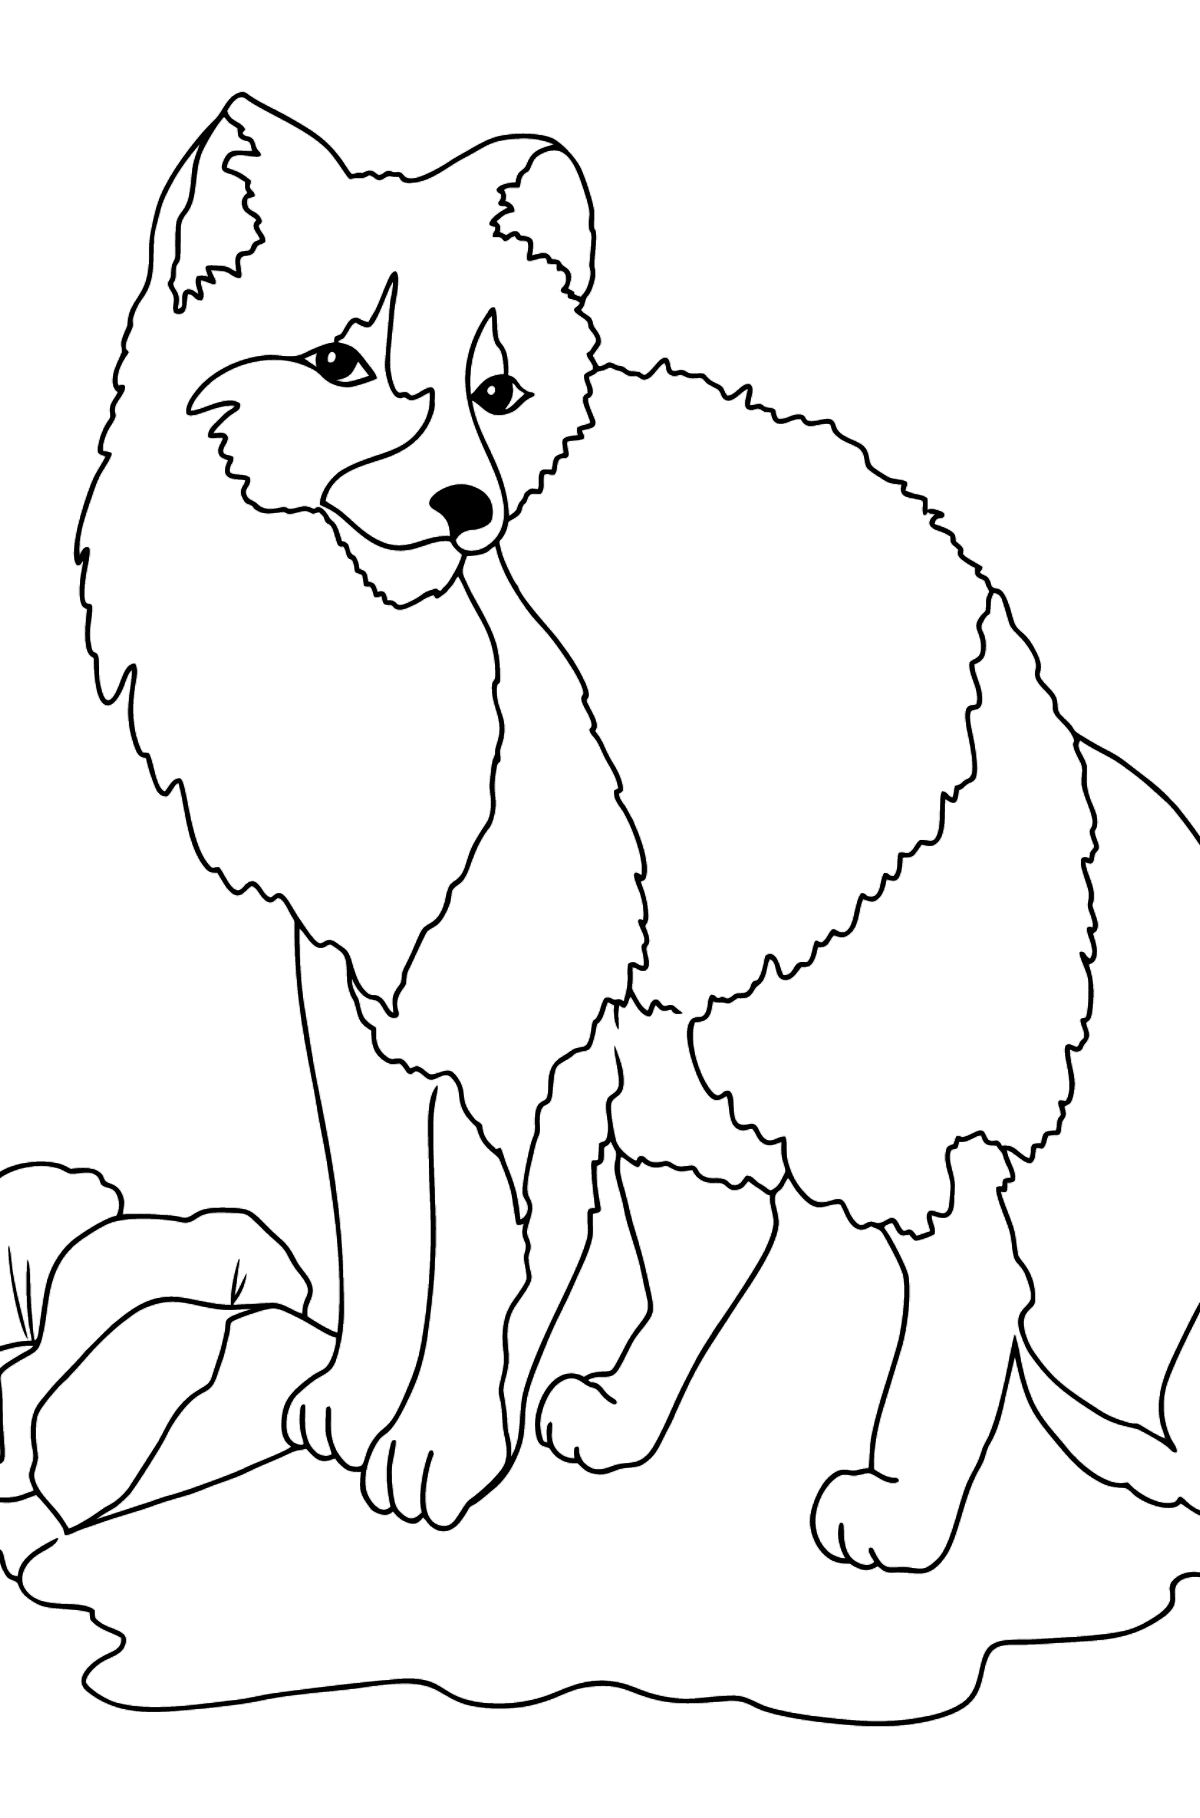 Coloring Page - A Polar or an Arctic Fox - Coloring Pages for Kids